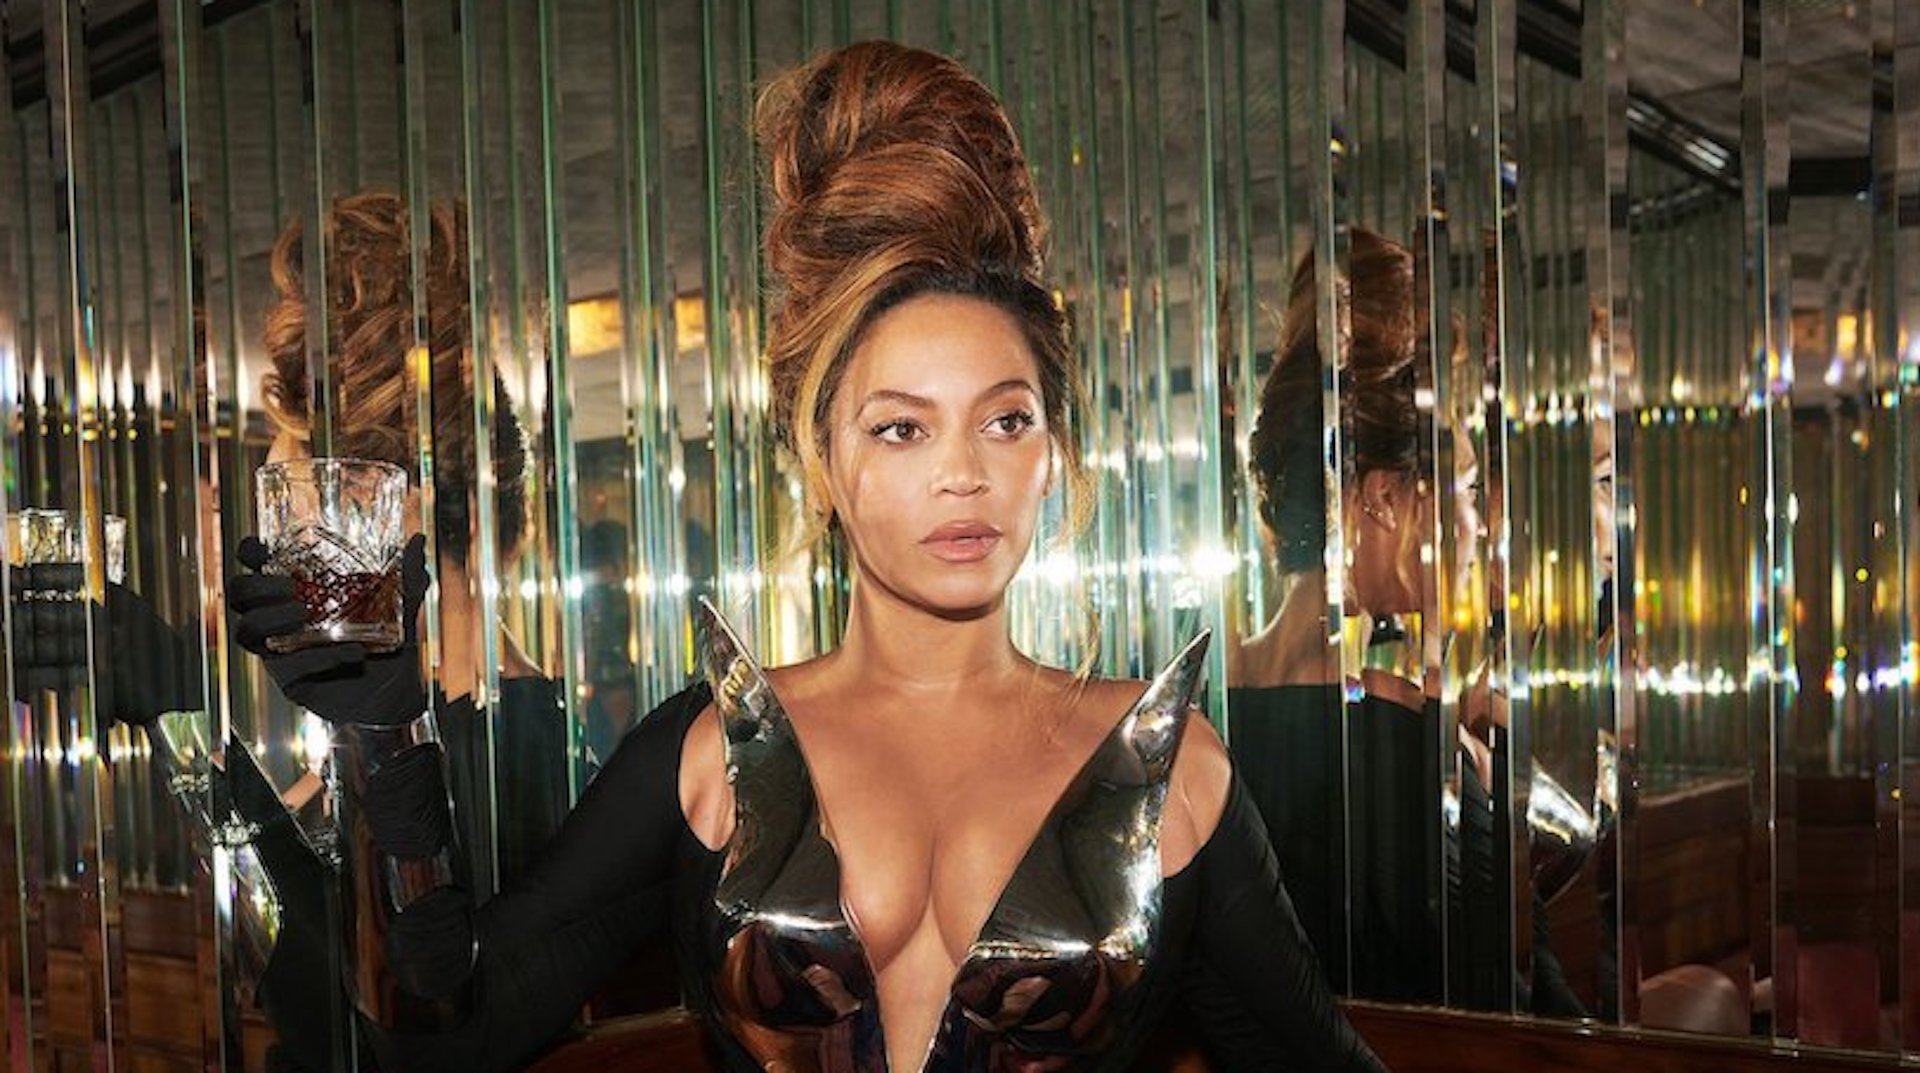 Grammy-winner, Beyoncé, is going on tour for her latest album, 'Renaissance,' in the Summer of 2023. The Wearable Art Gala raffled off Beyoncé's $20,000 concert tickets.